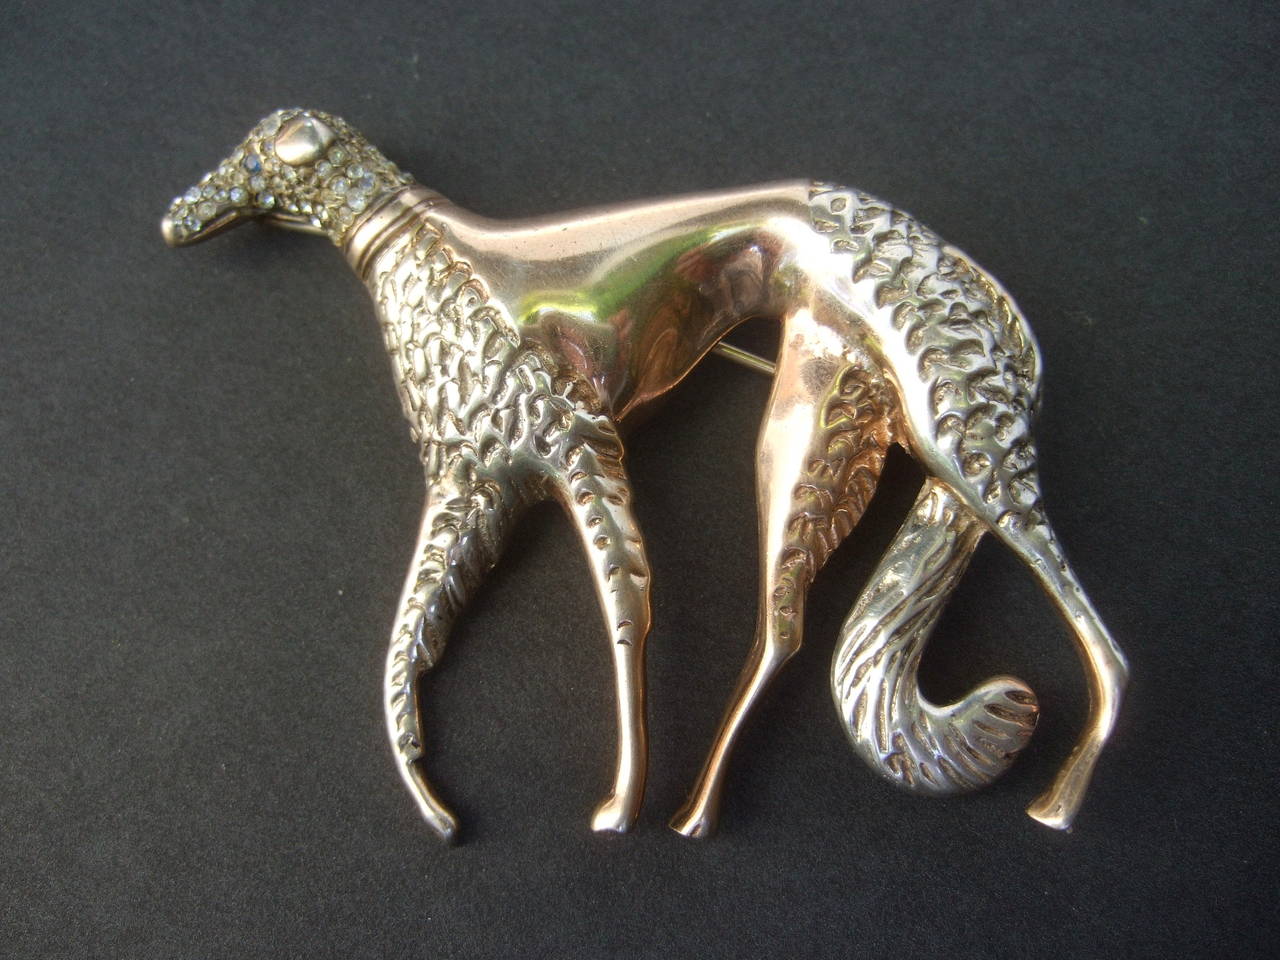 Exquisite Art Deco Borzoi sterling vermeil brooch c 1940s
The elegant stylized canine brooch is encrusted 
with glittering pave crystals on the dog's head
The dog's eye is embellished with a single sapphire  
blue tiny crystal 

The borzoi's